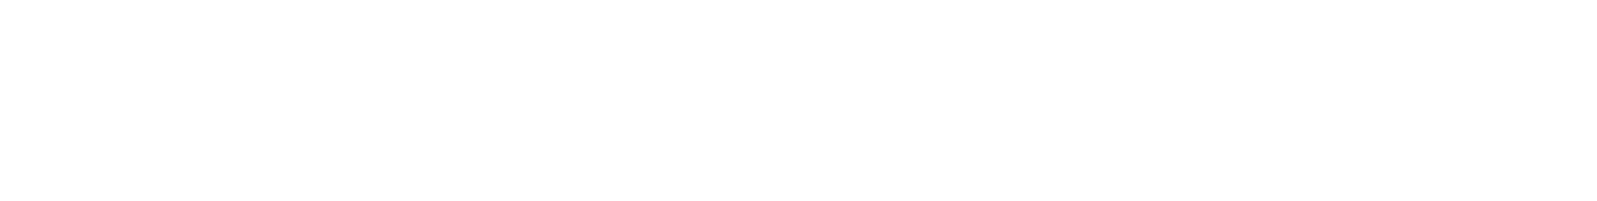 OU Dodge Family College of Arts and Sciences, Clara Luper Department of African and African-American Studies, The University of Oklahoma wordmark